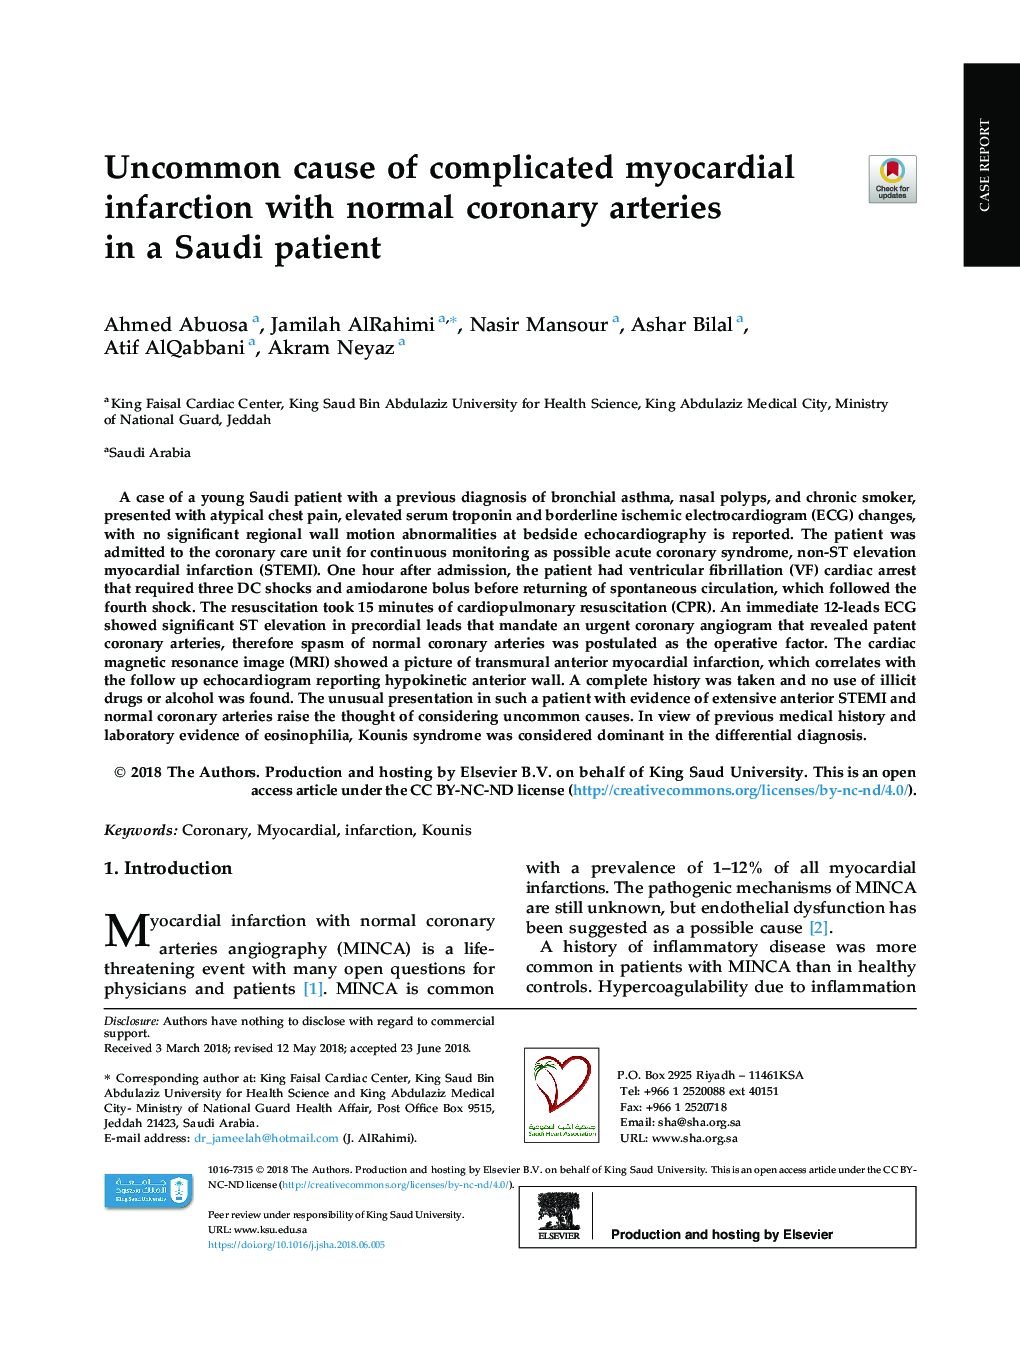 Uncommon cause of complicated myocardial infarction with normal coronary arteries in a Saudi patient